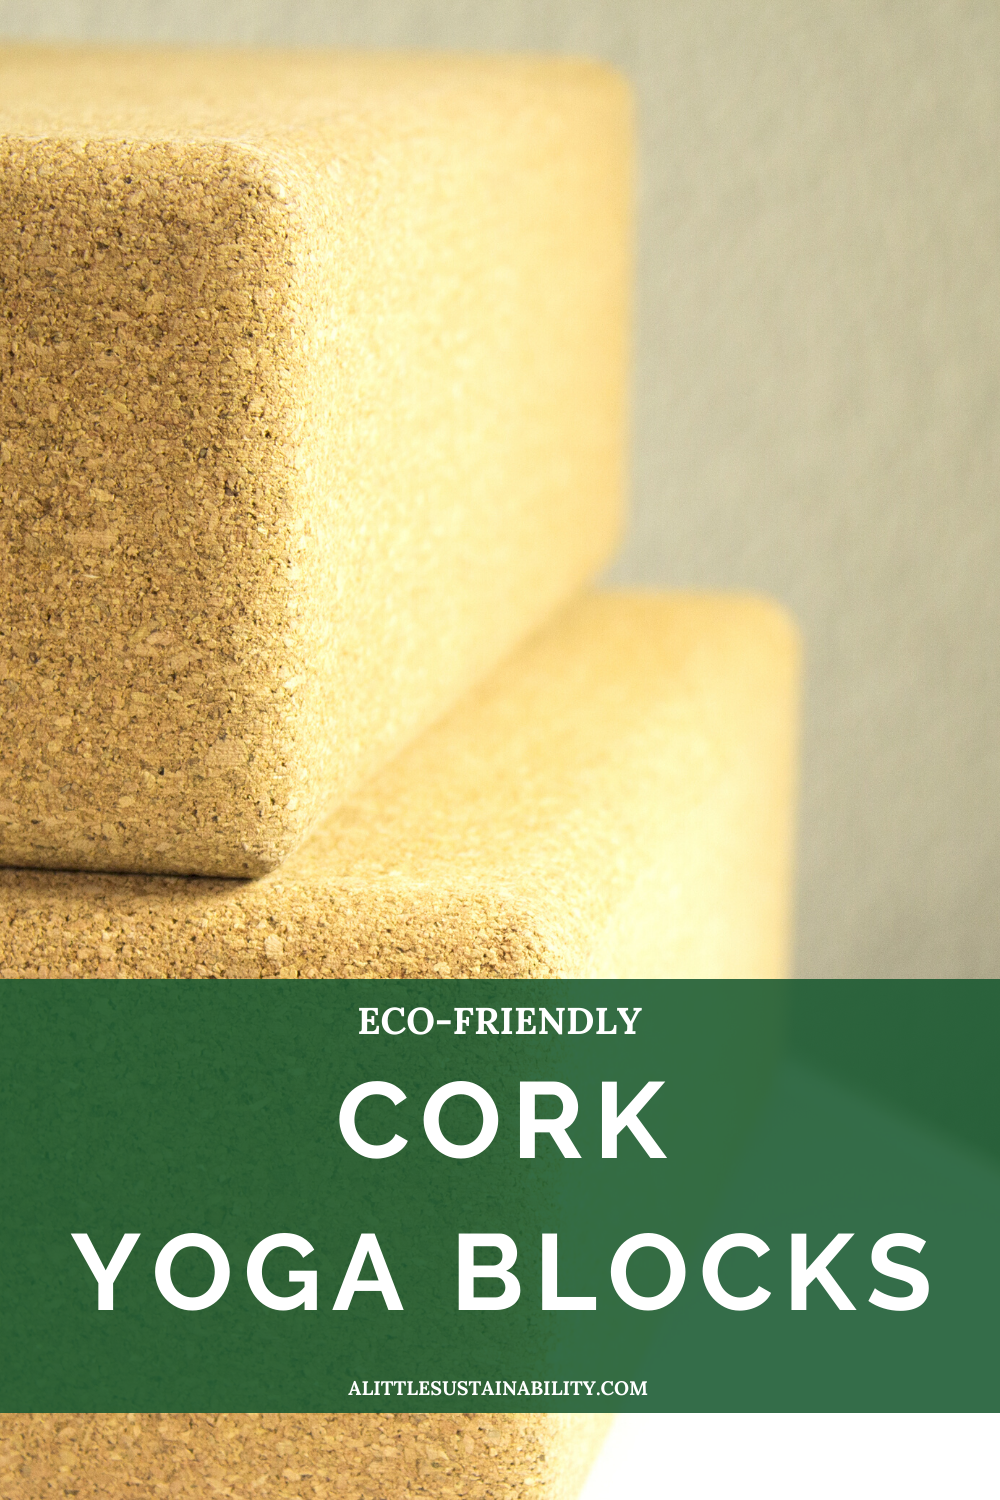 Eco Friendly Cork Yoga Blocks. The best eco-friendly yoga blocks are made of cork, bamboo, or upcycled. All these yoga brands produce sustainable cork yoga blocks that are durable.